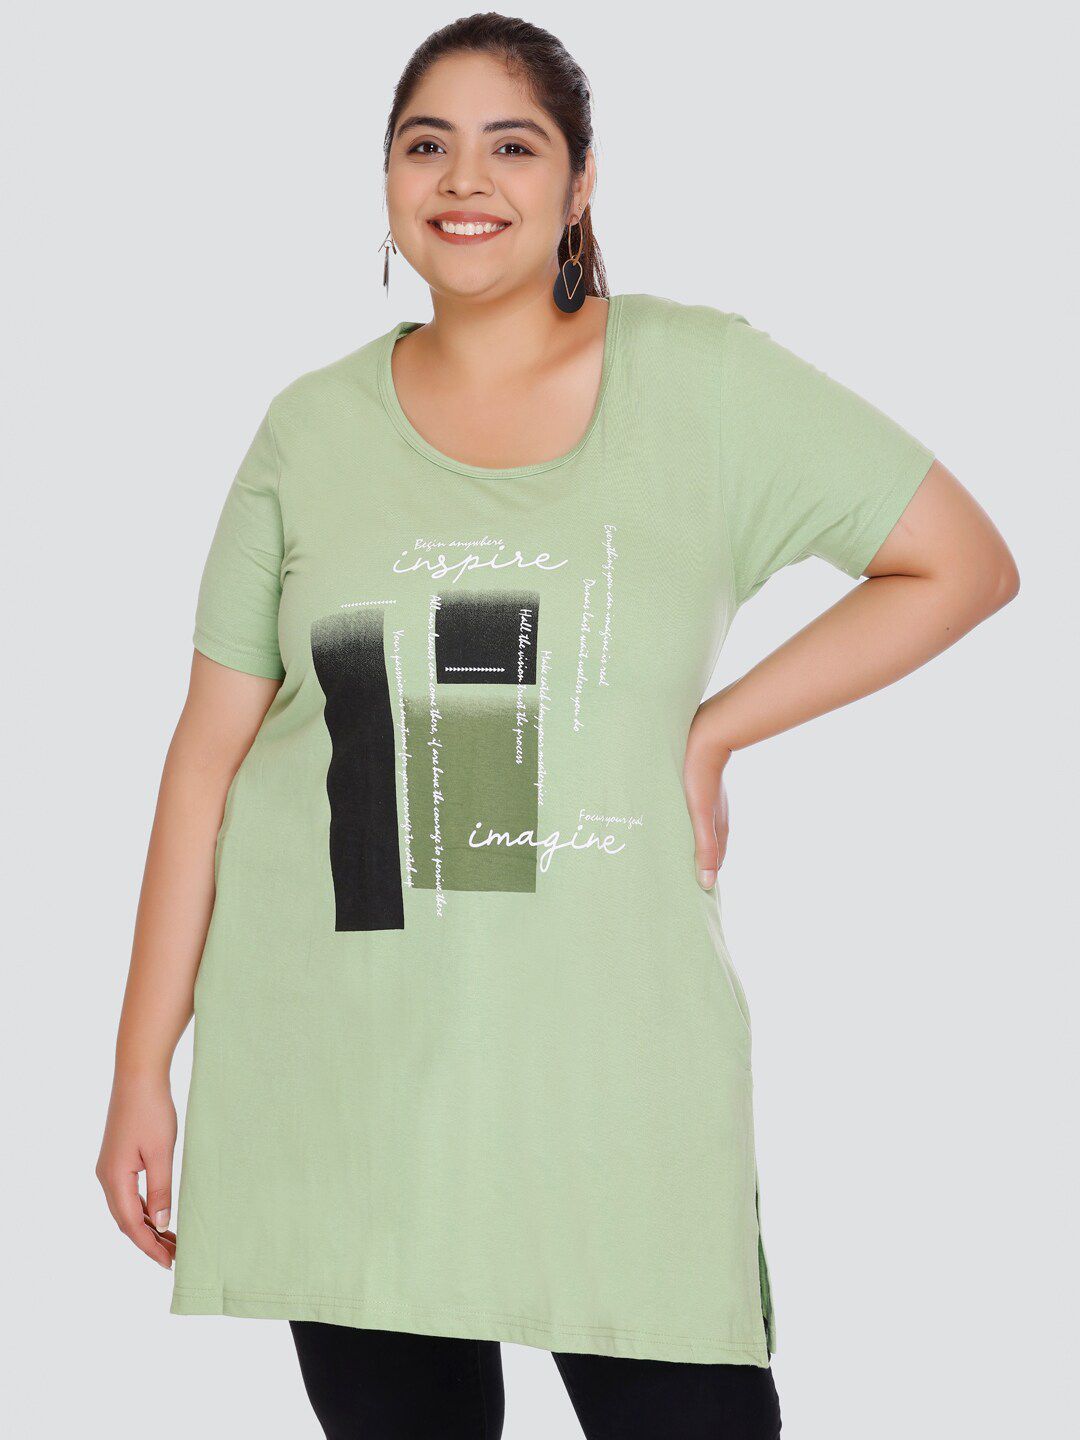 CUPID Plus Size Typography Printed Cotton Longline Top Price in India